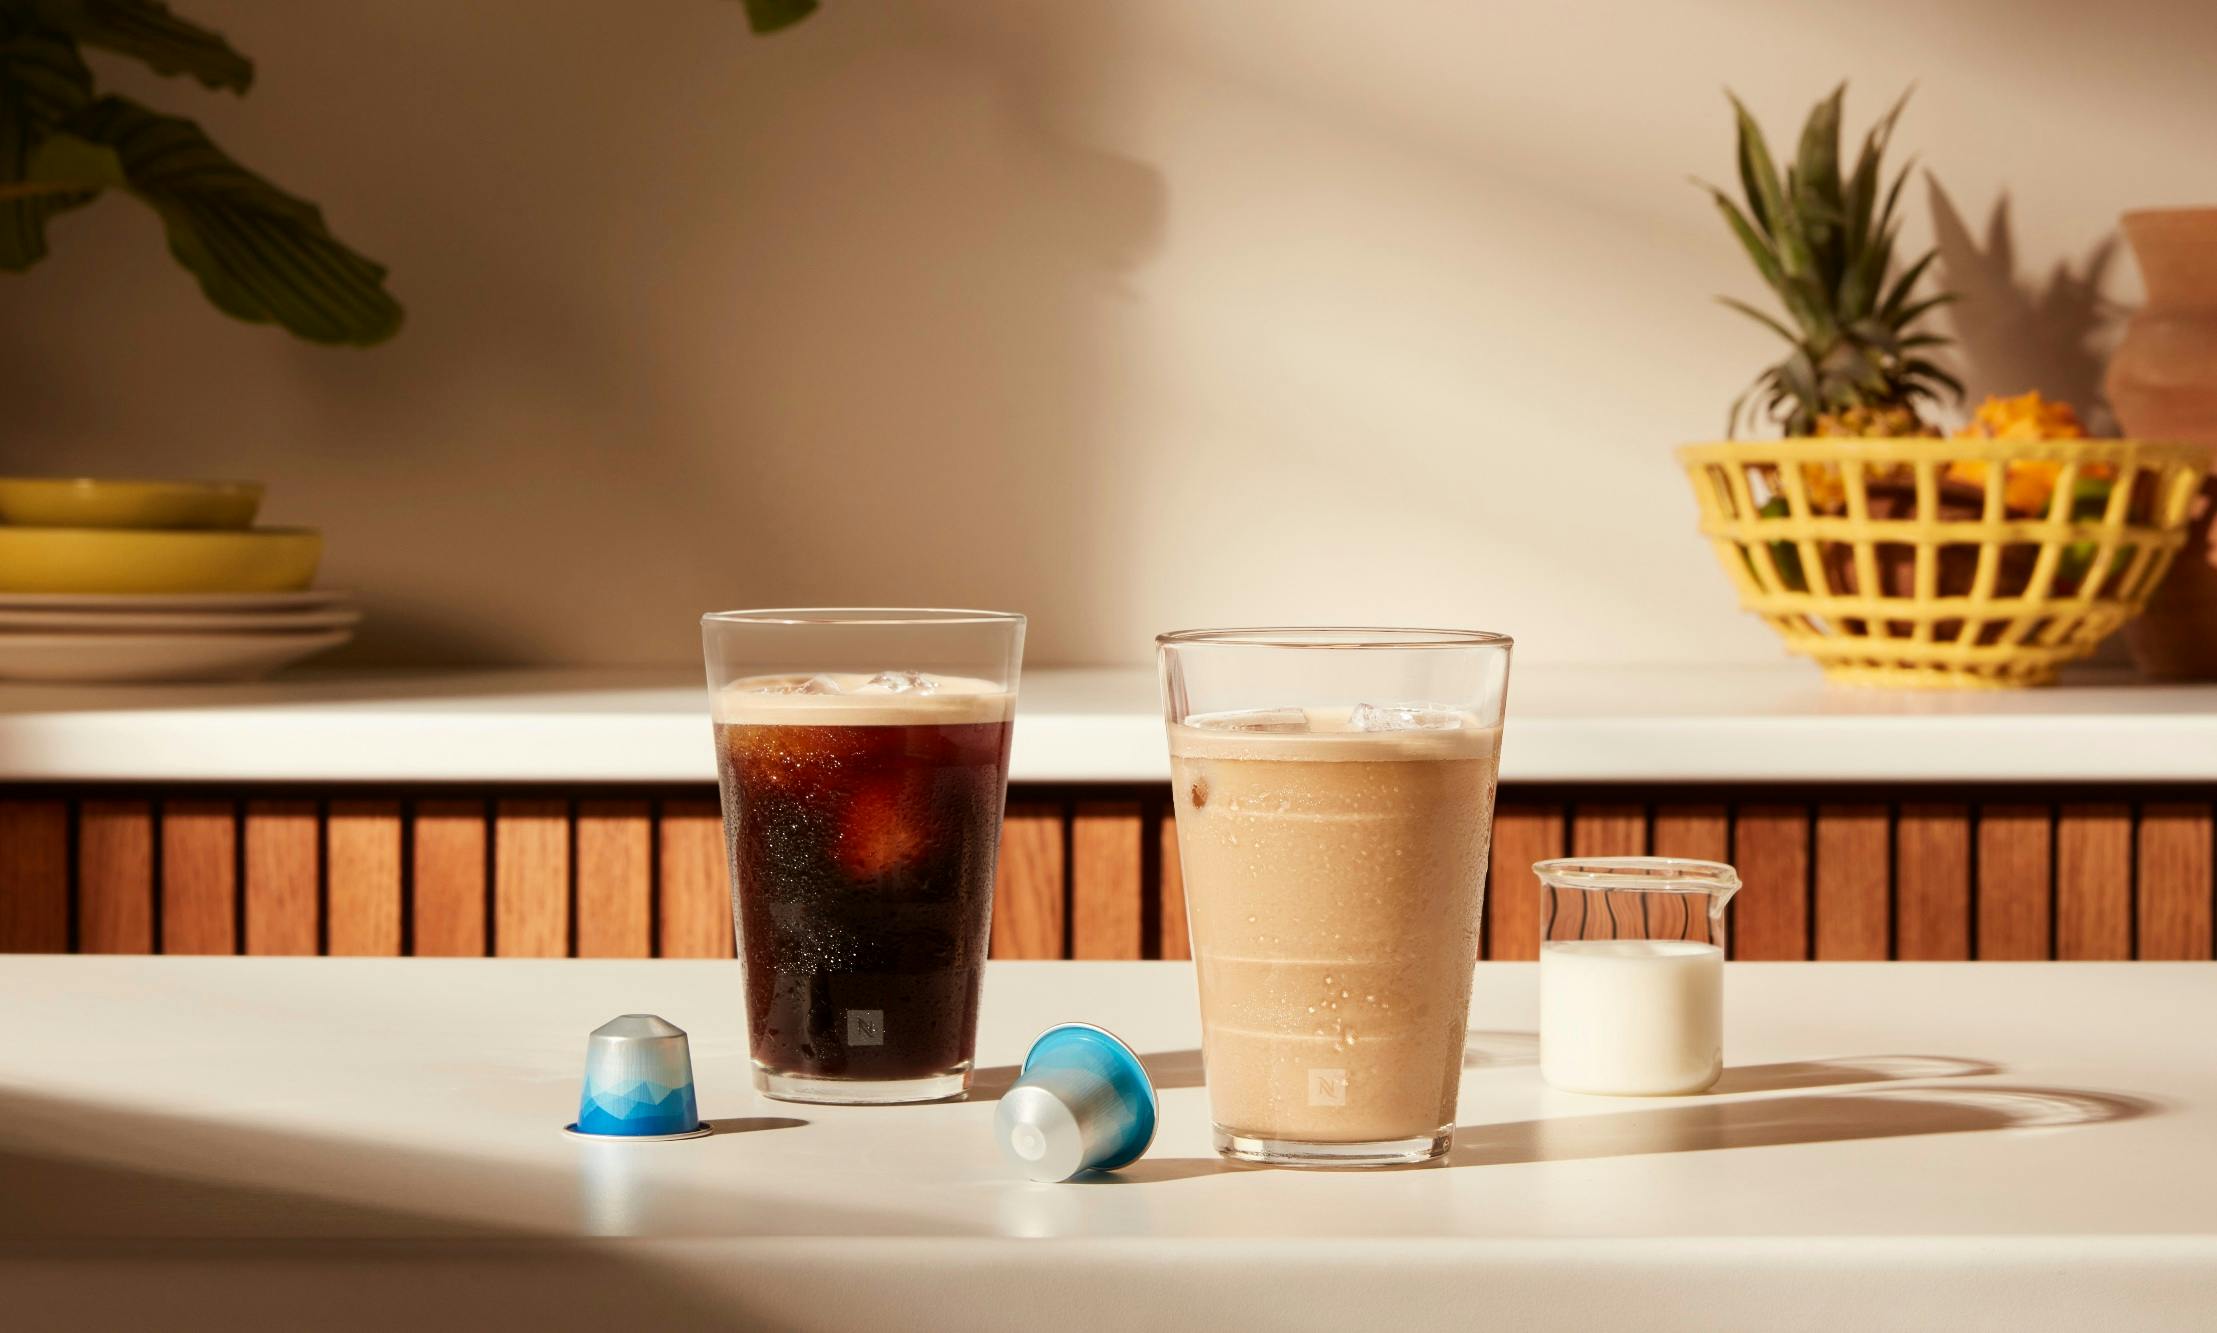 Nespresso launches two new limited edition iced coffees for the summer